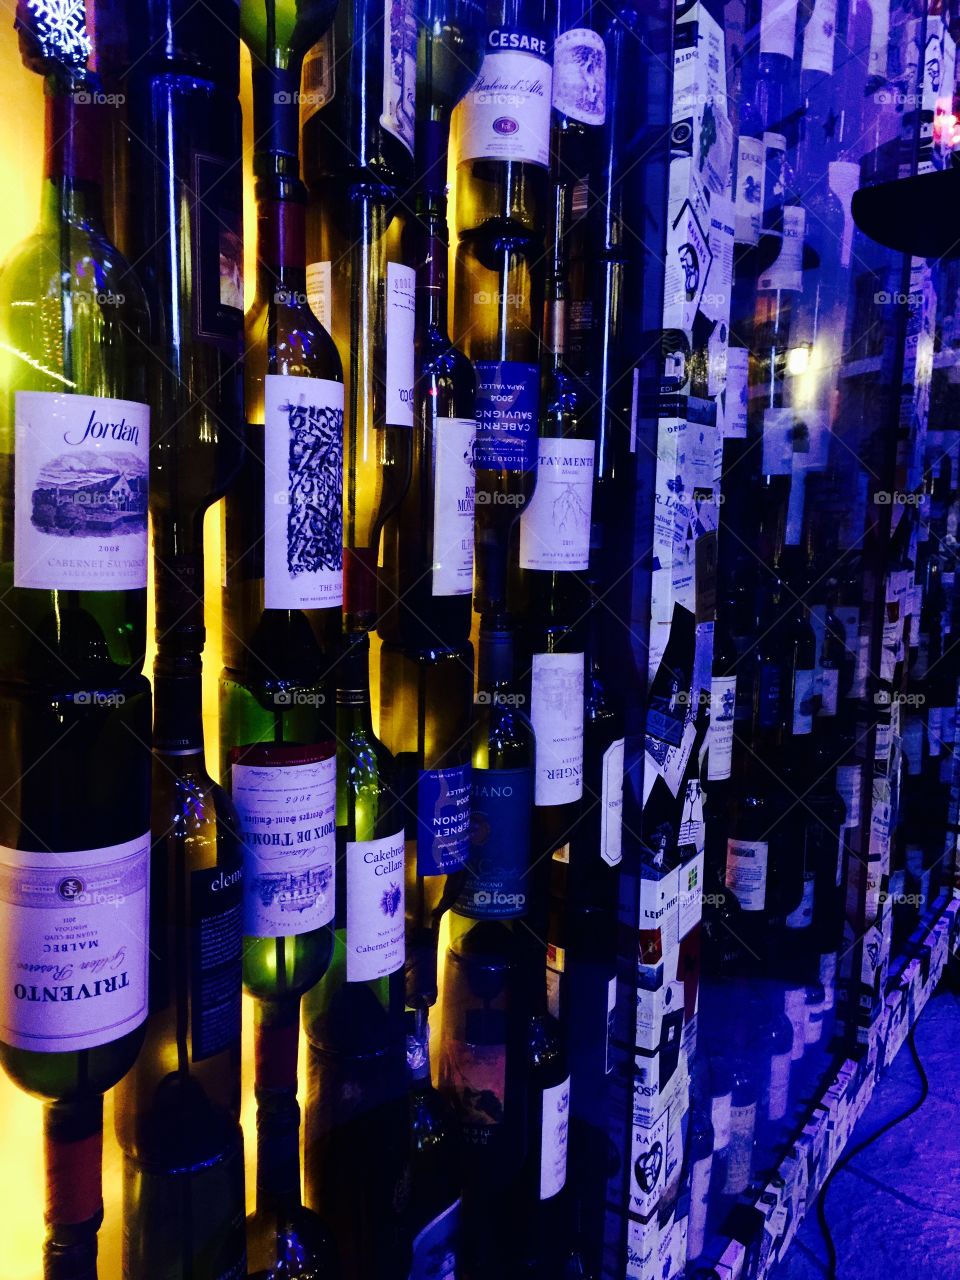 Abstract wine bottle display